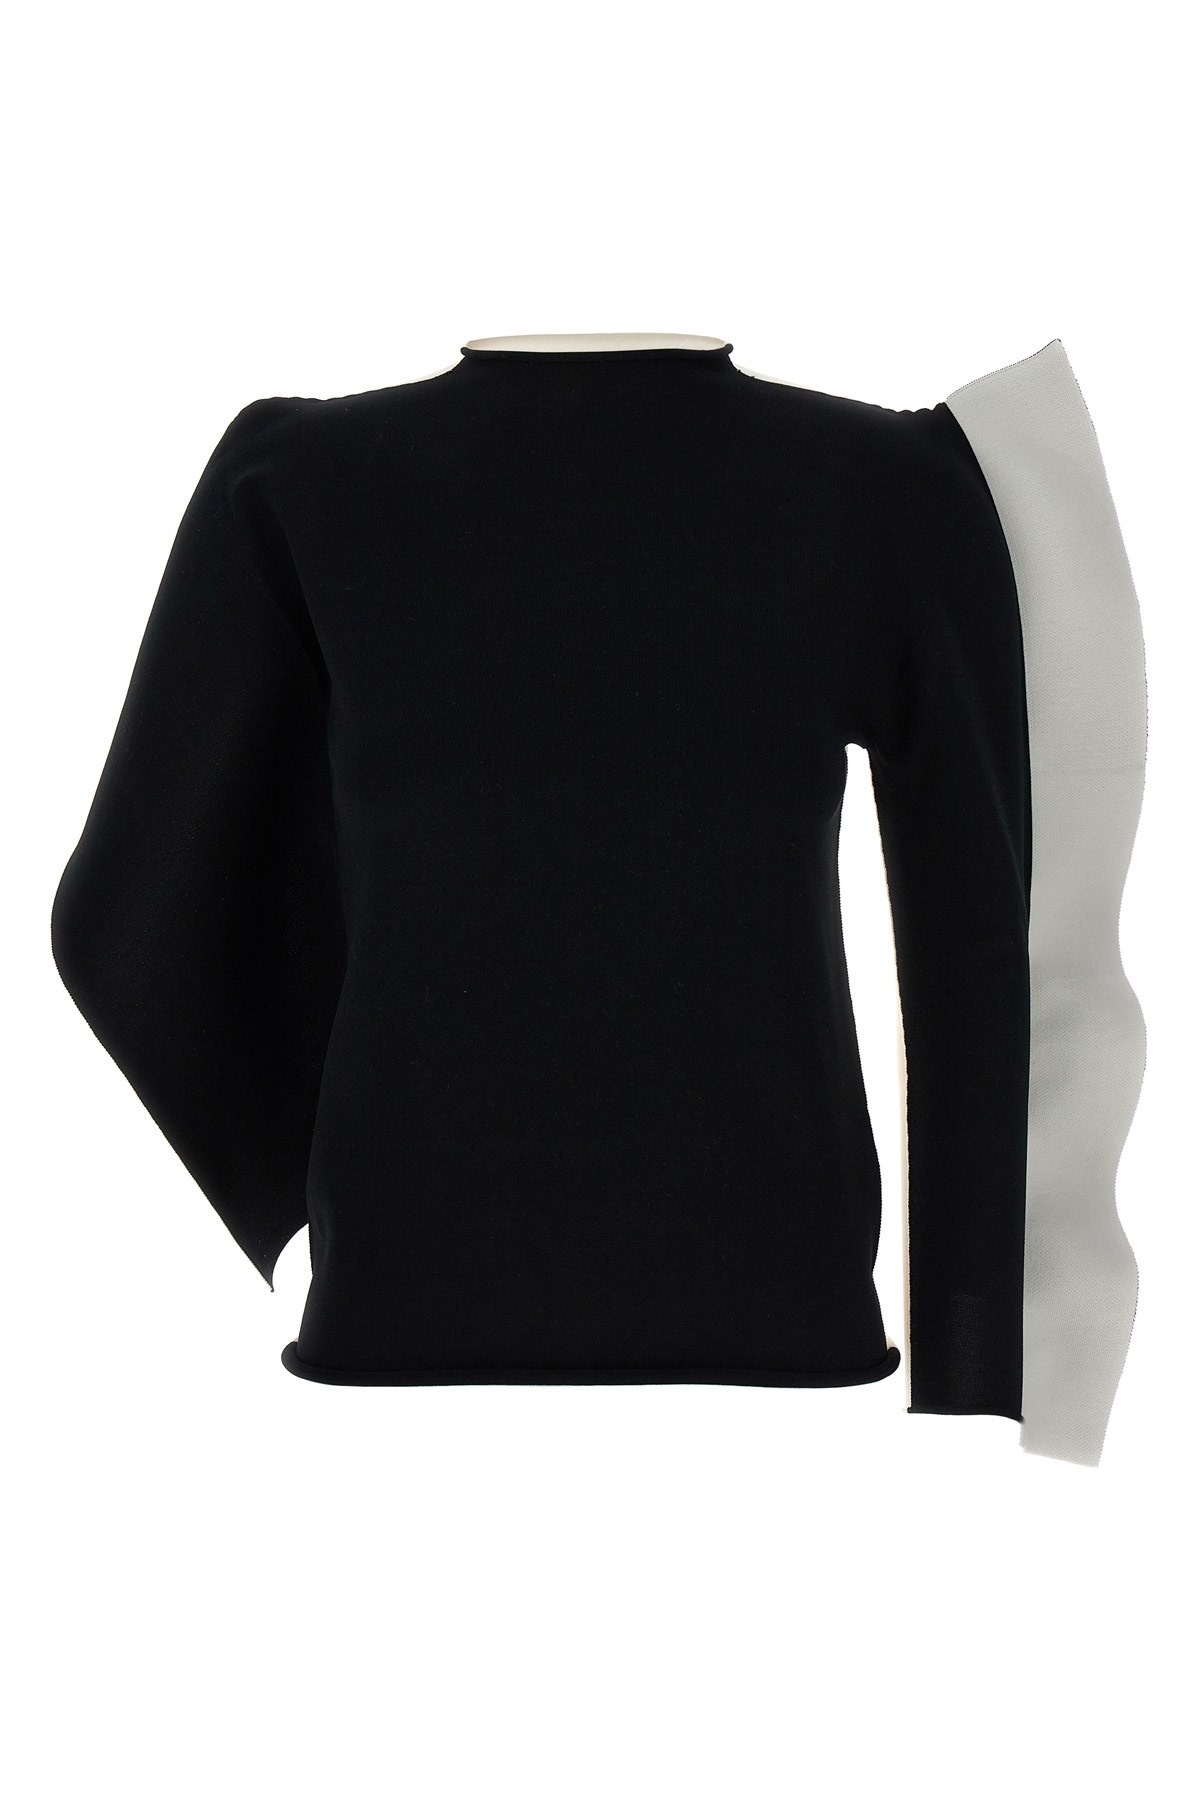 'Shaped Canvas' sweater - 1